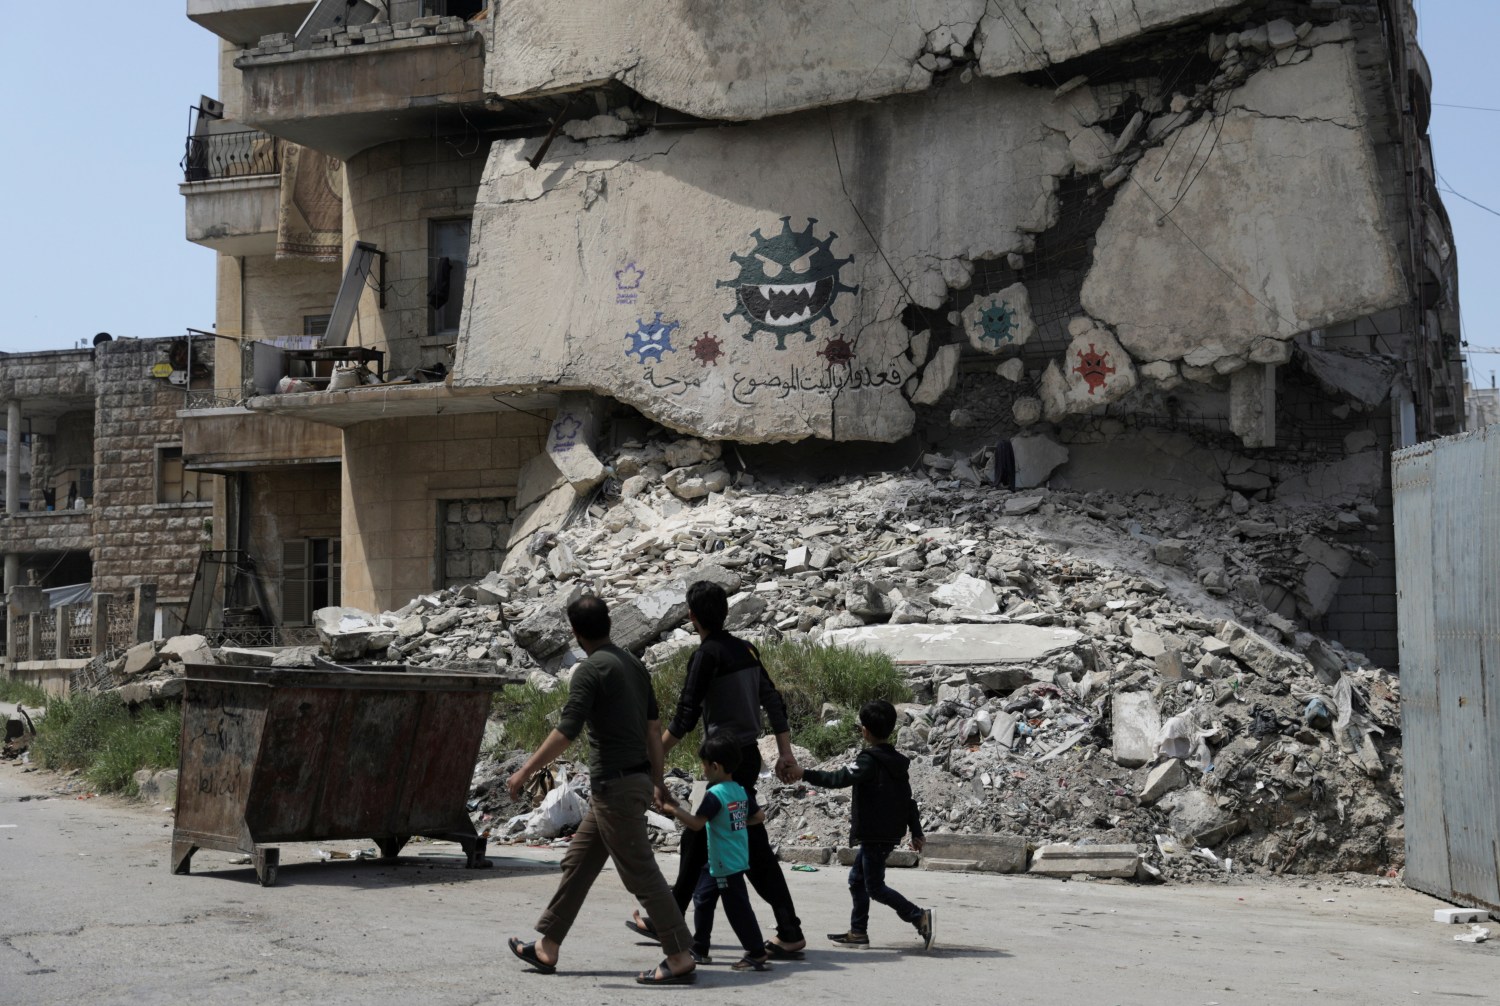 People walk past a damaged building depicting drawings alluding to the coronavirus and encouraging people to stay at home, in the rebel-held Idlib city, amid concerns about the spread of the coronavirus disease (COVID-19), Syria April 18, 2020. REUTERS/Khalil Ashawi     TPX IMAGES OF THE DAY